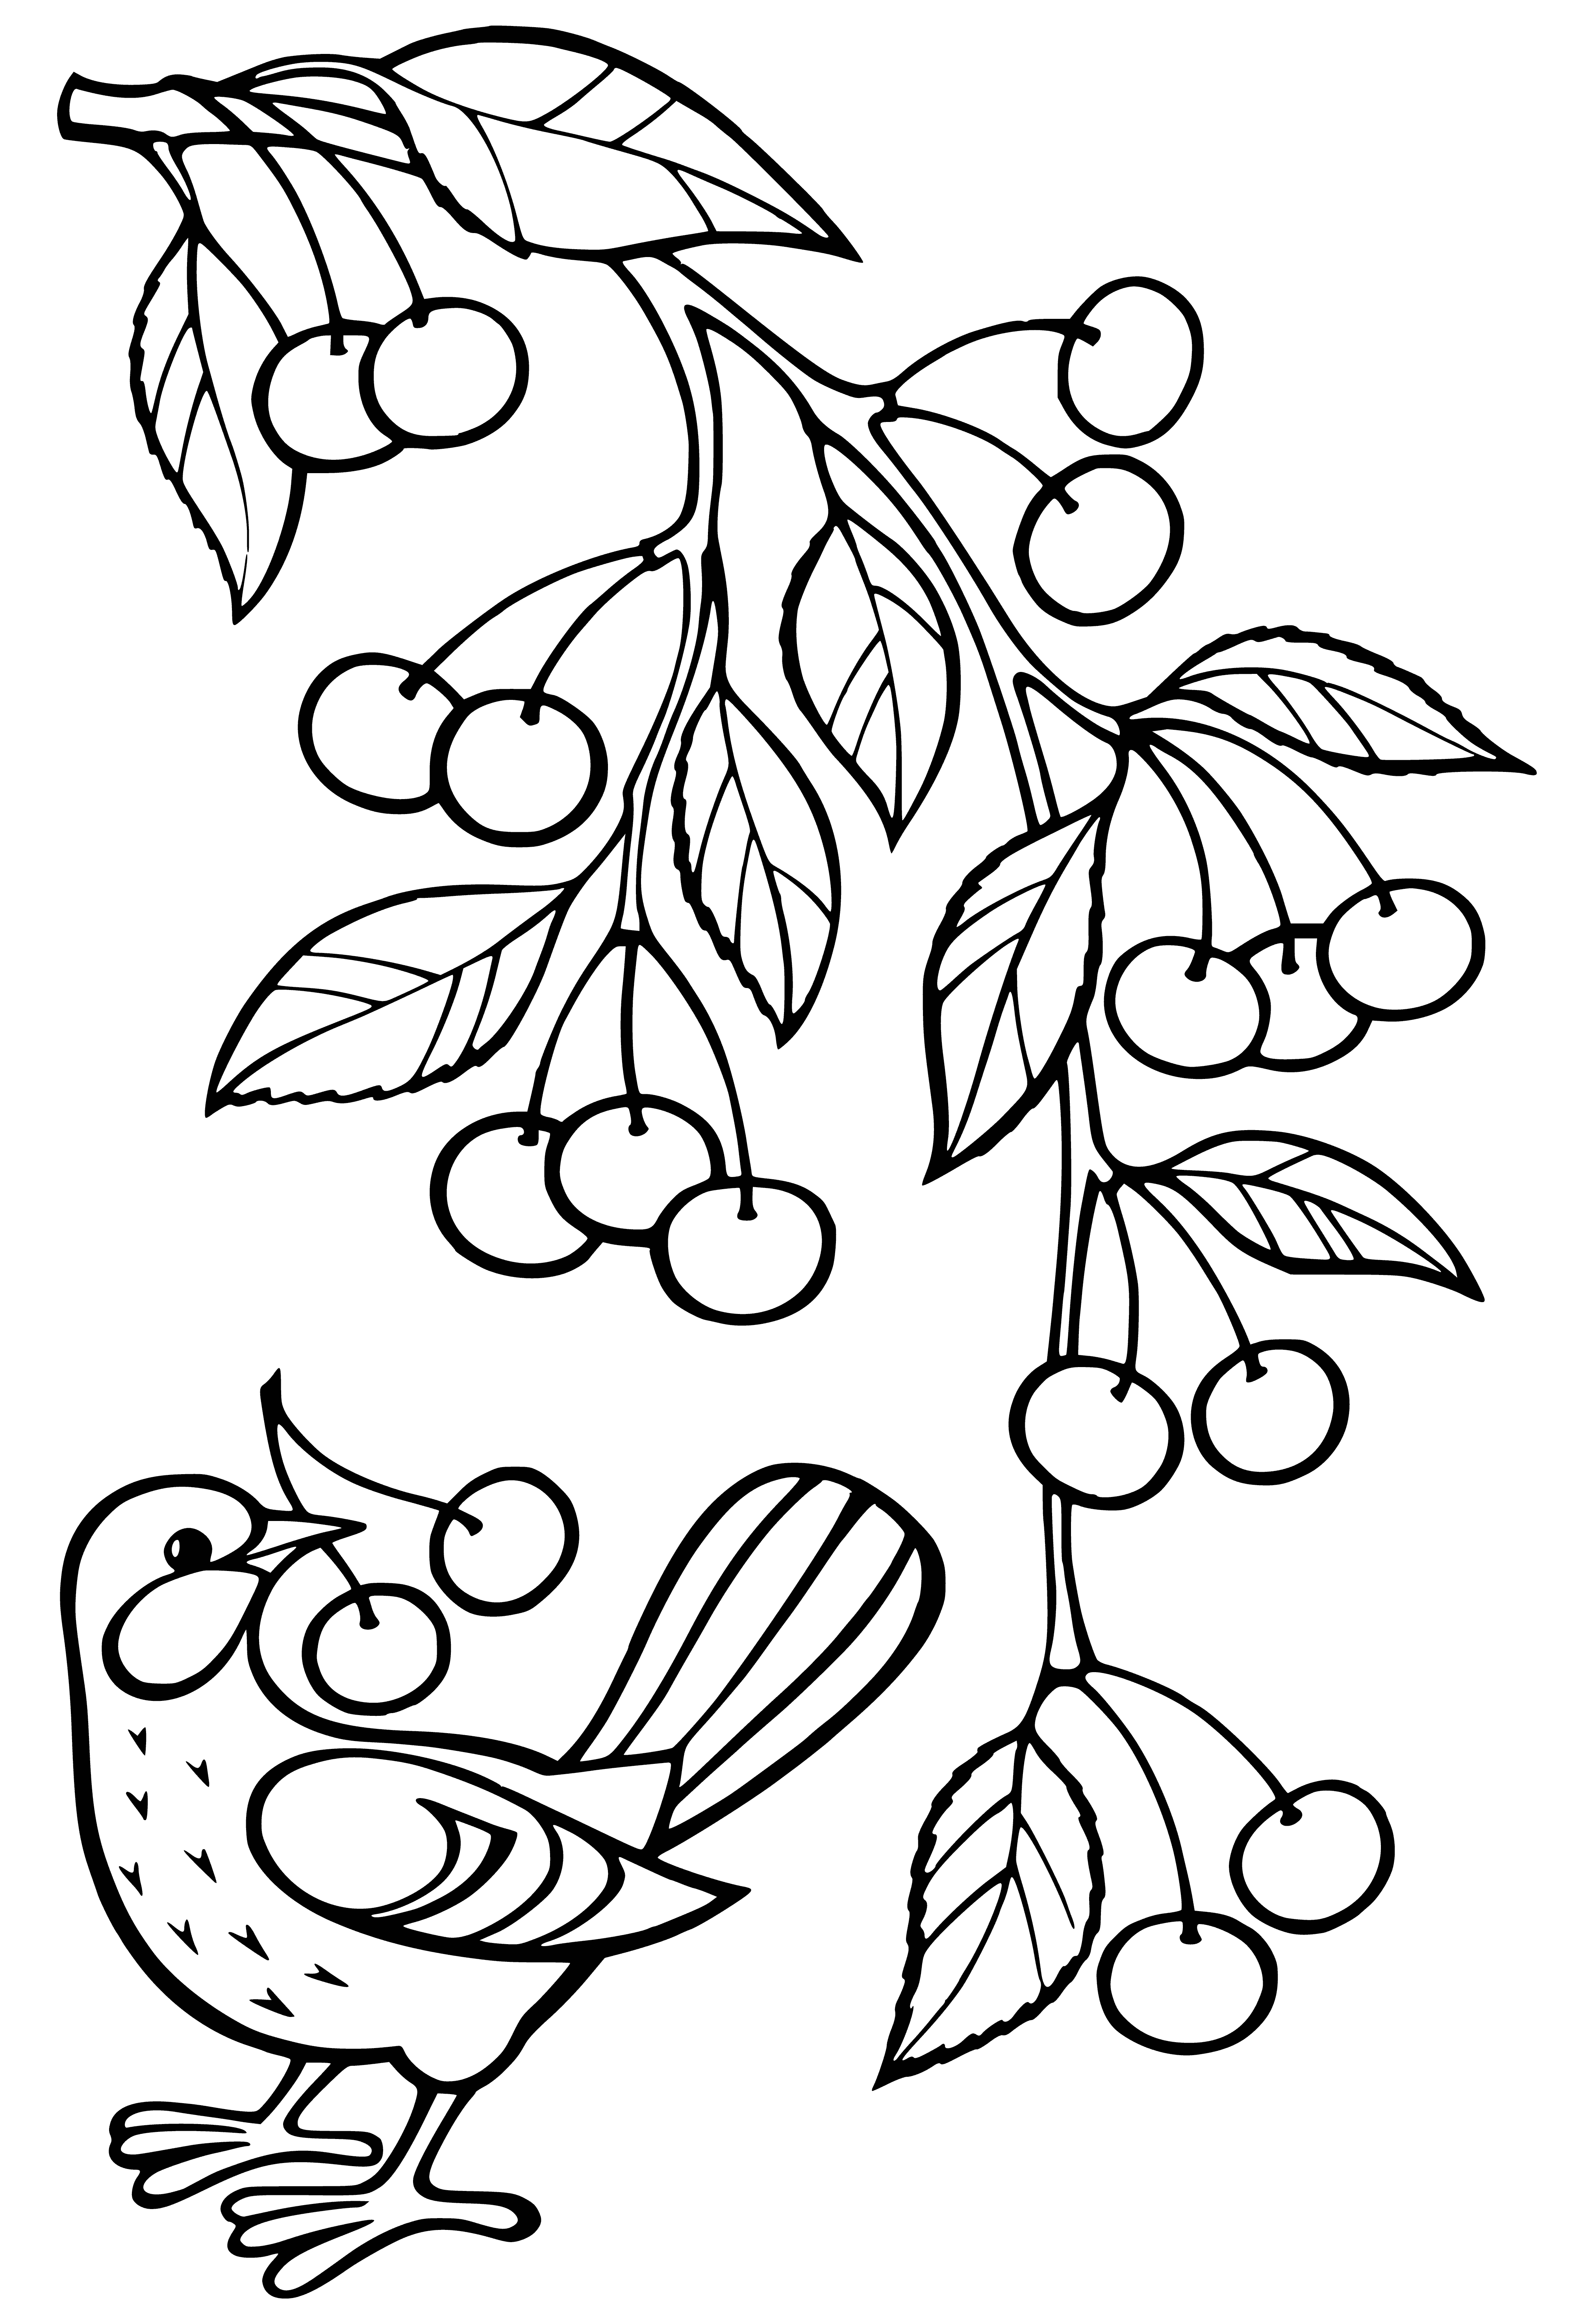 Branch with cherries coloring page